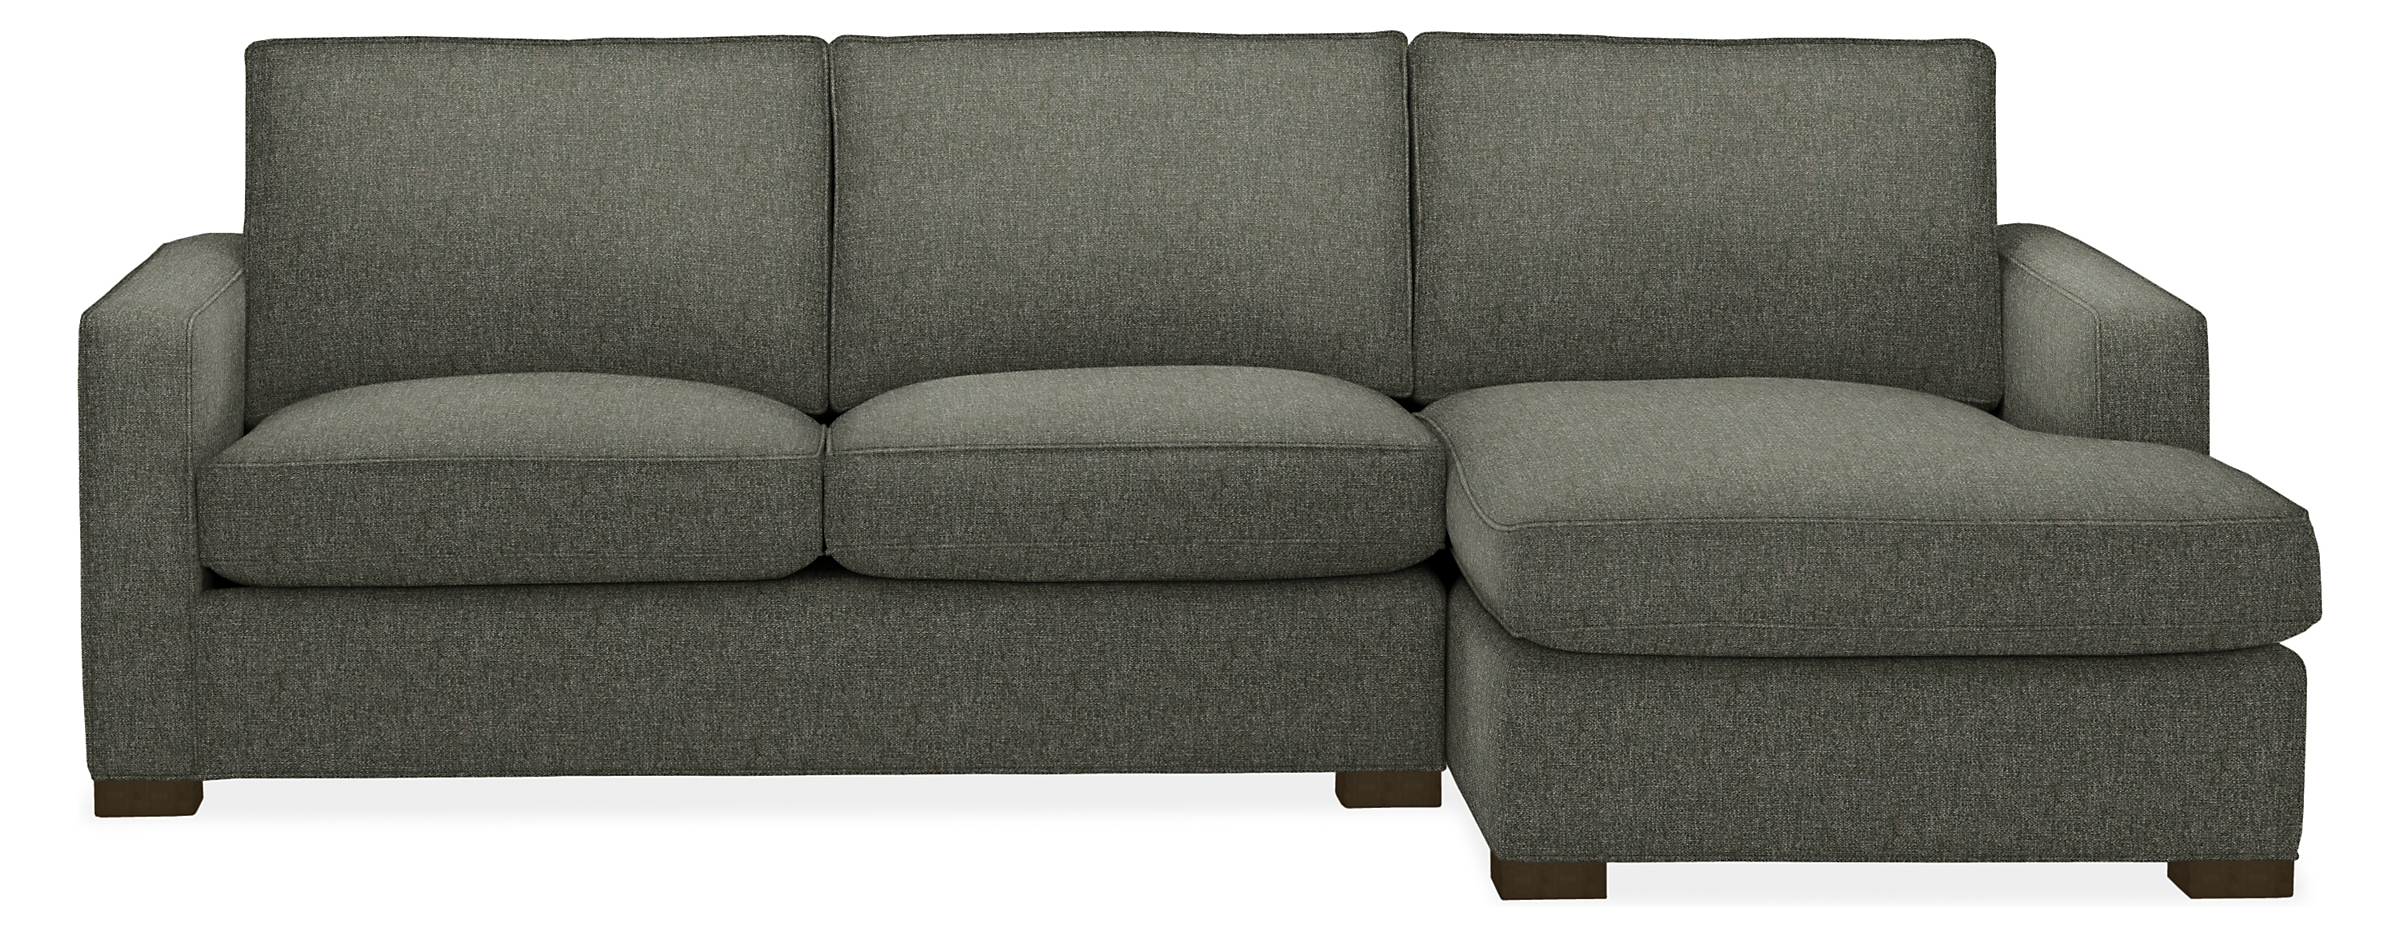 Morrison 108" Sofa with Right-Arm Chaise